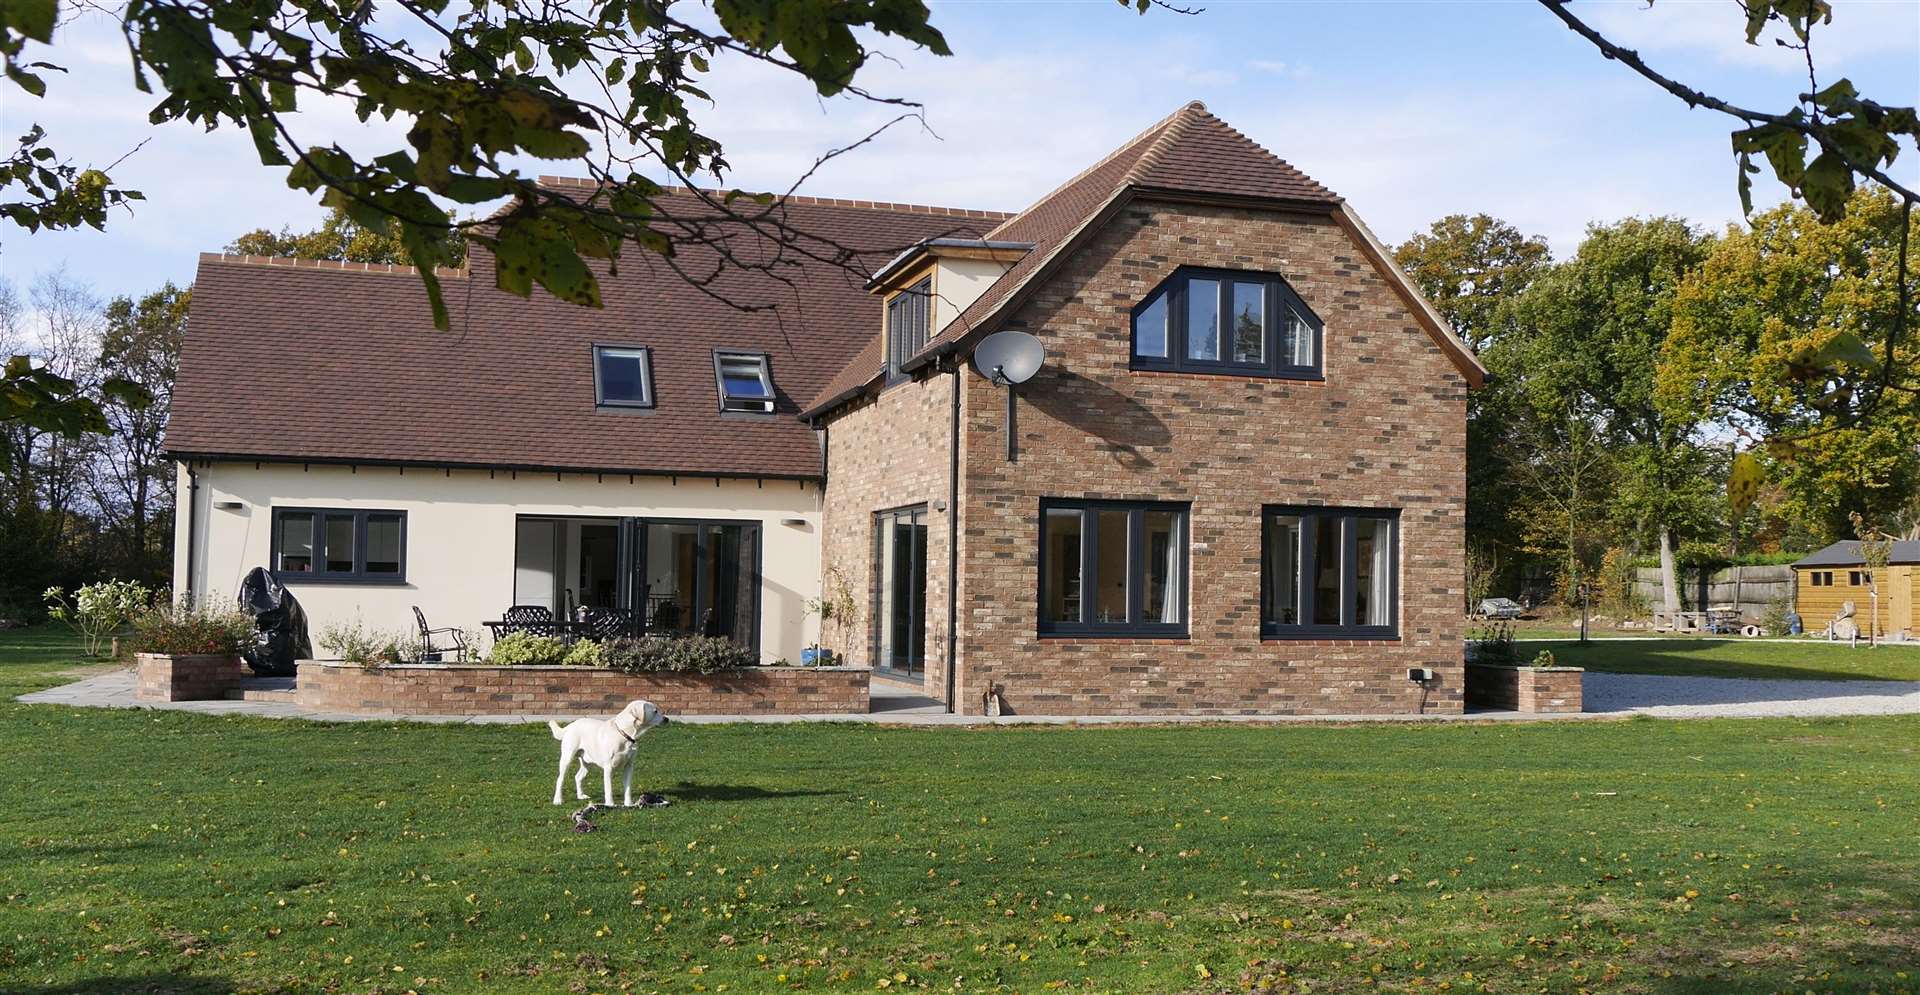 Christine and Chris Hughes used exhibitor Potton to build this home at Smarden